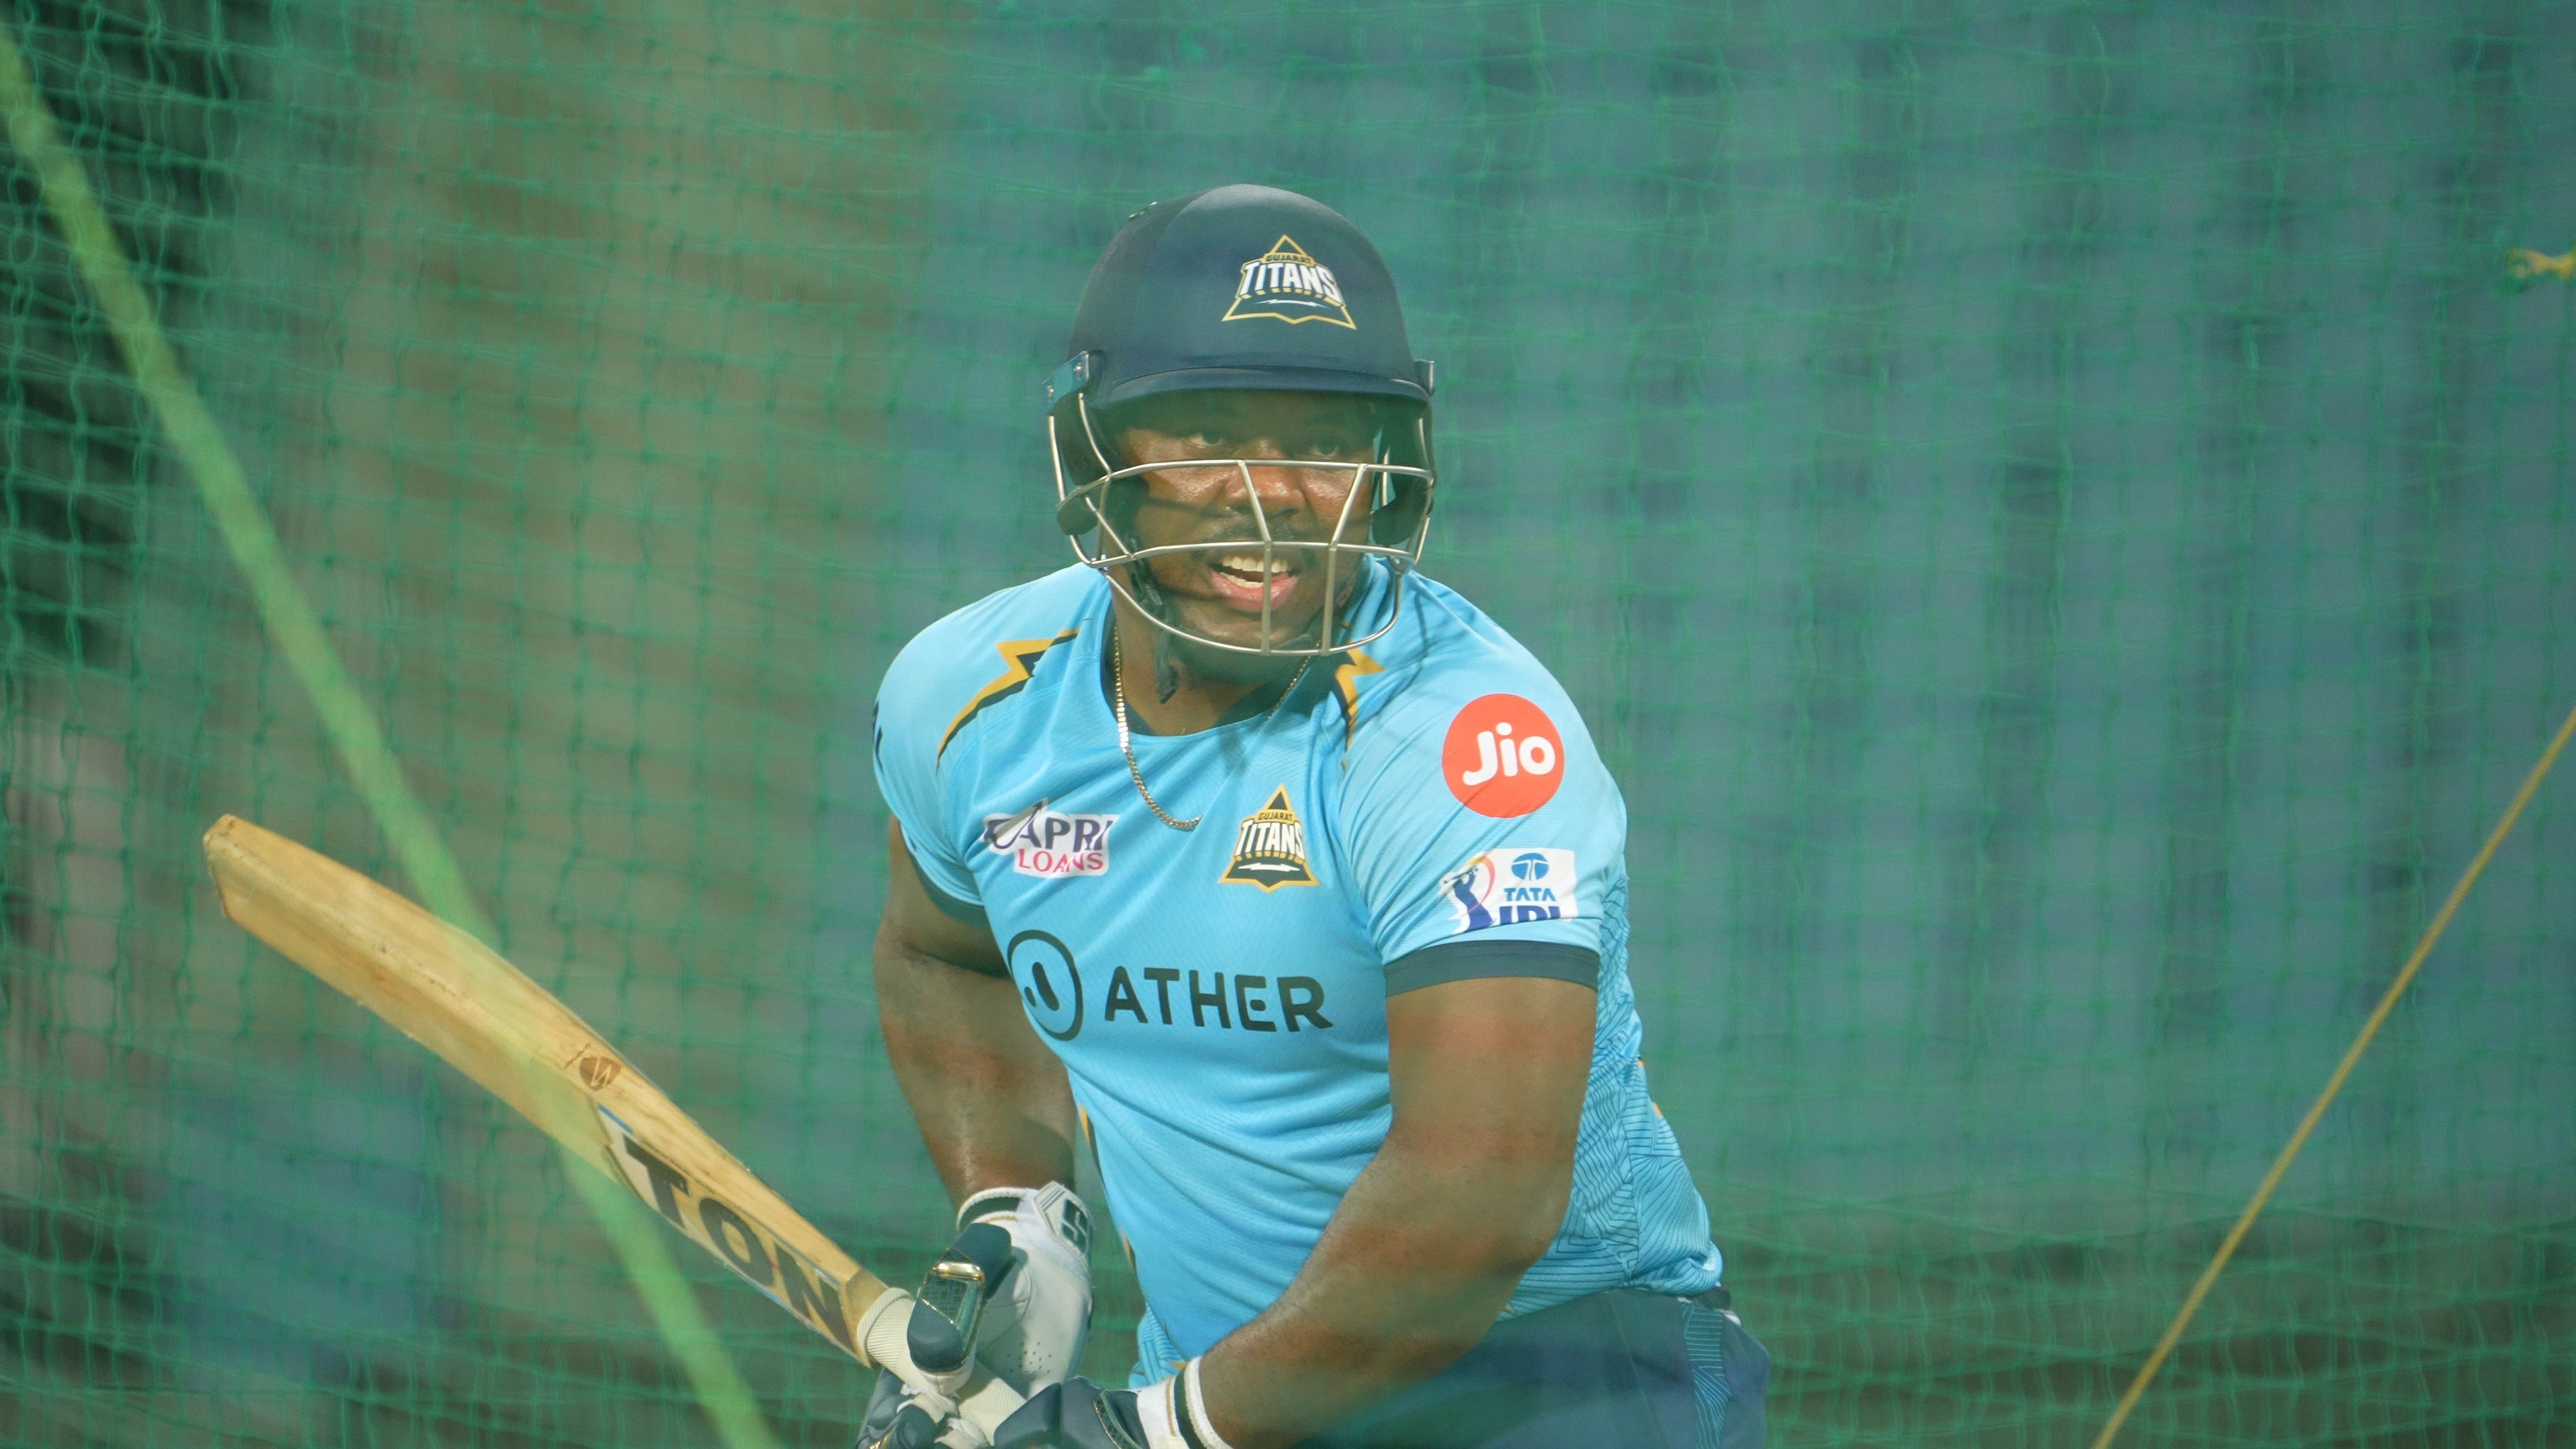 Titans batsmen hit it out of the park in the nets on JioTV